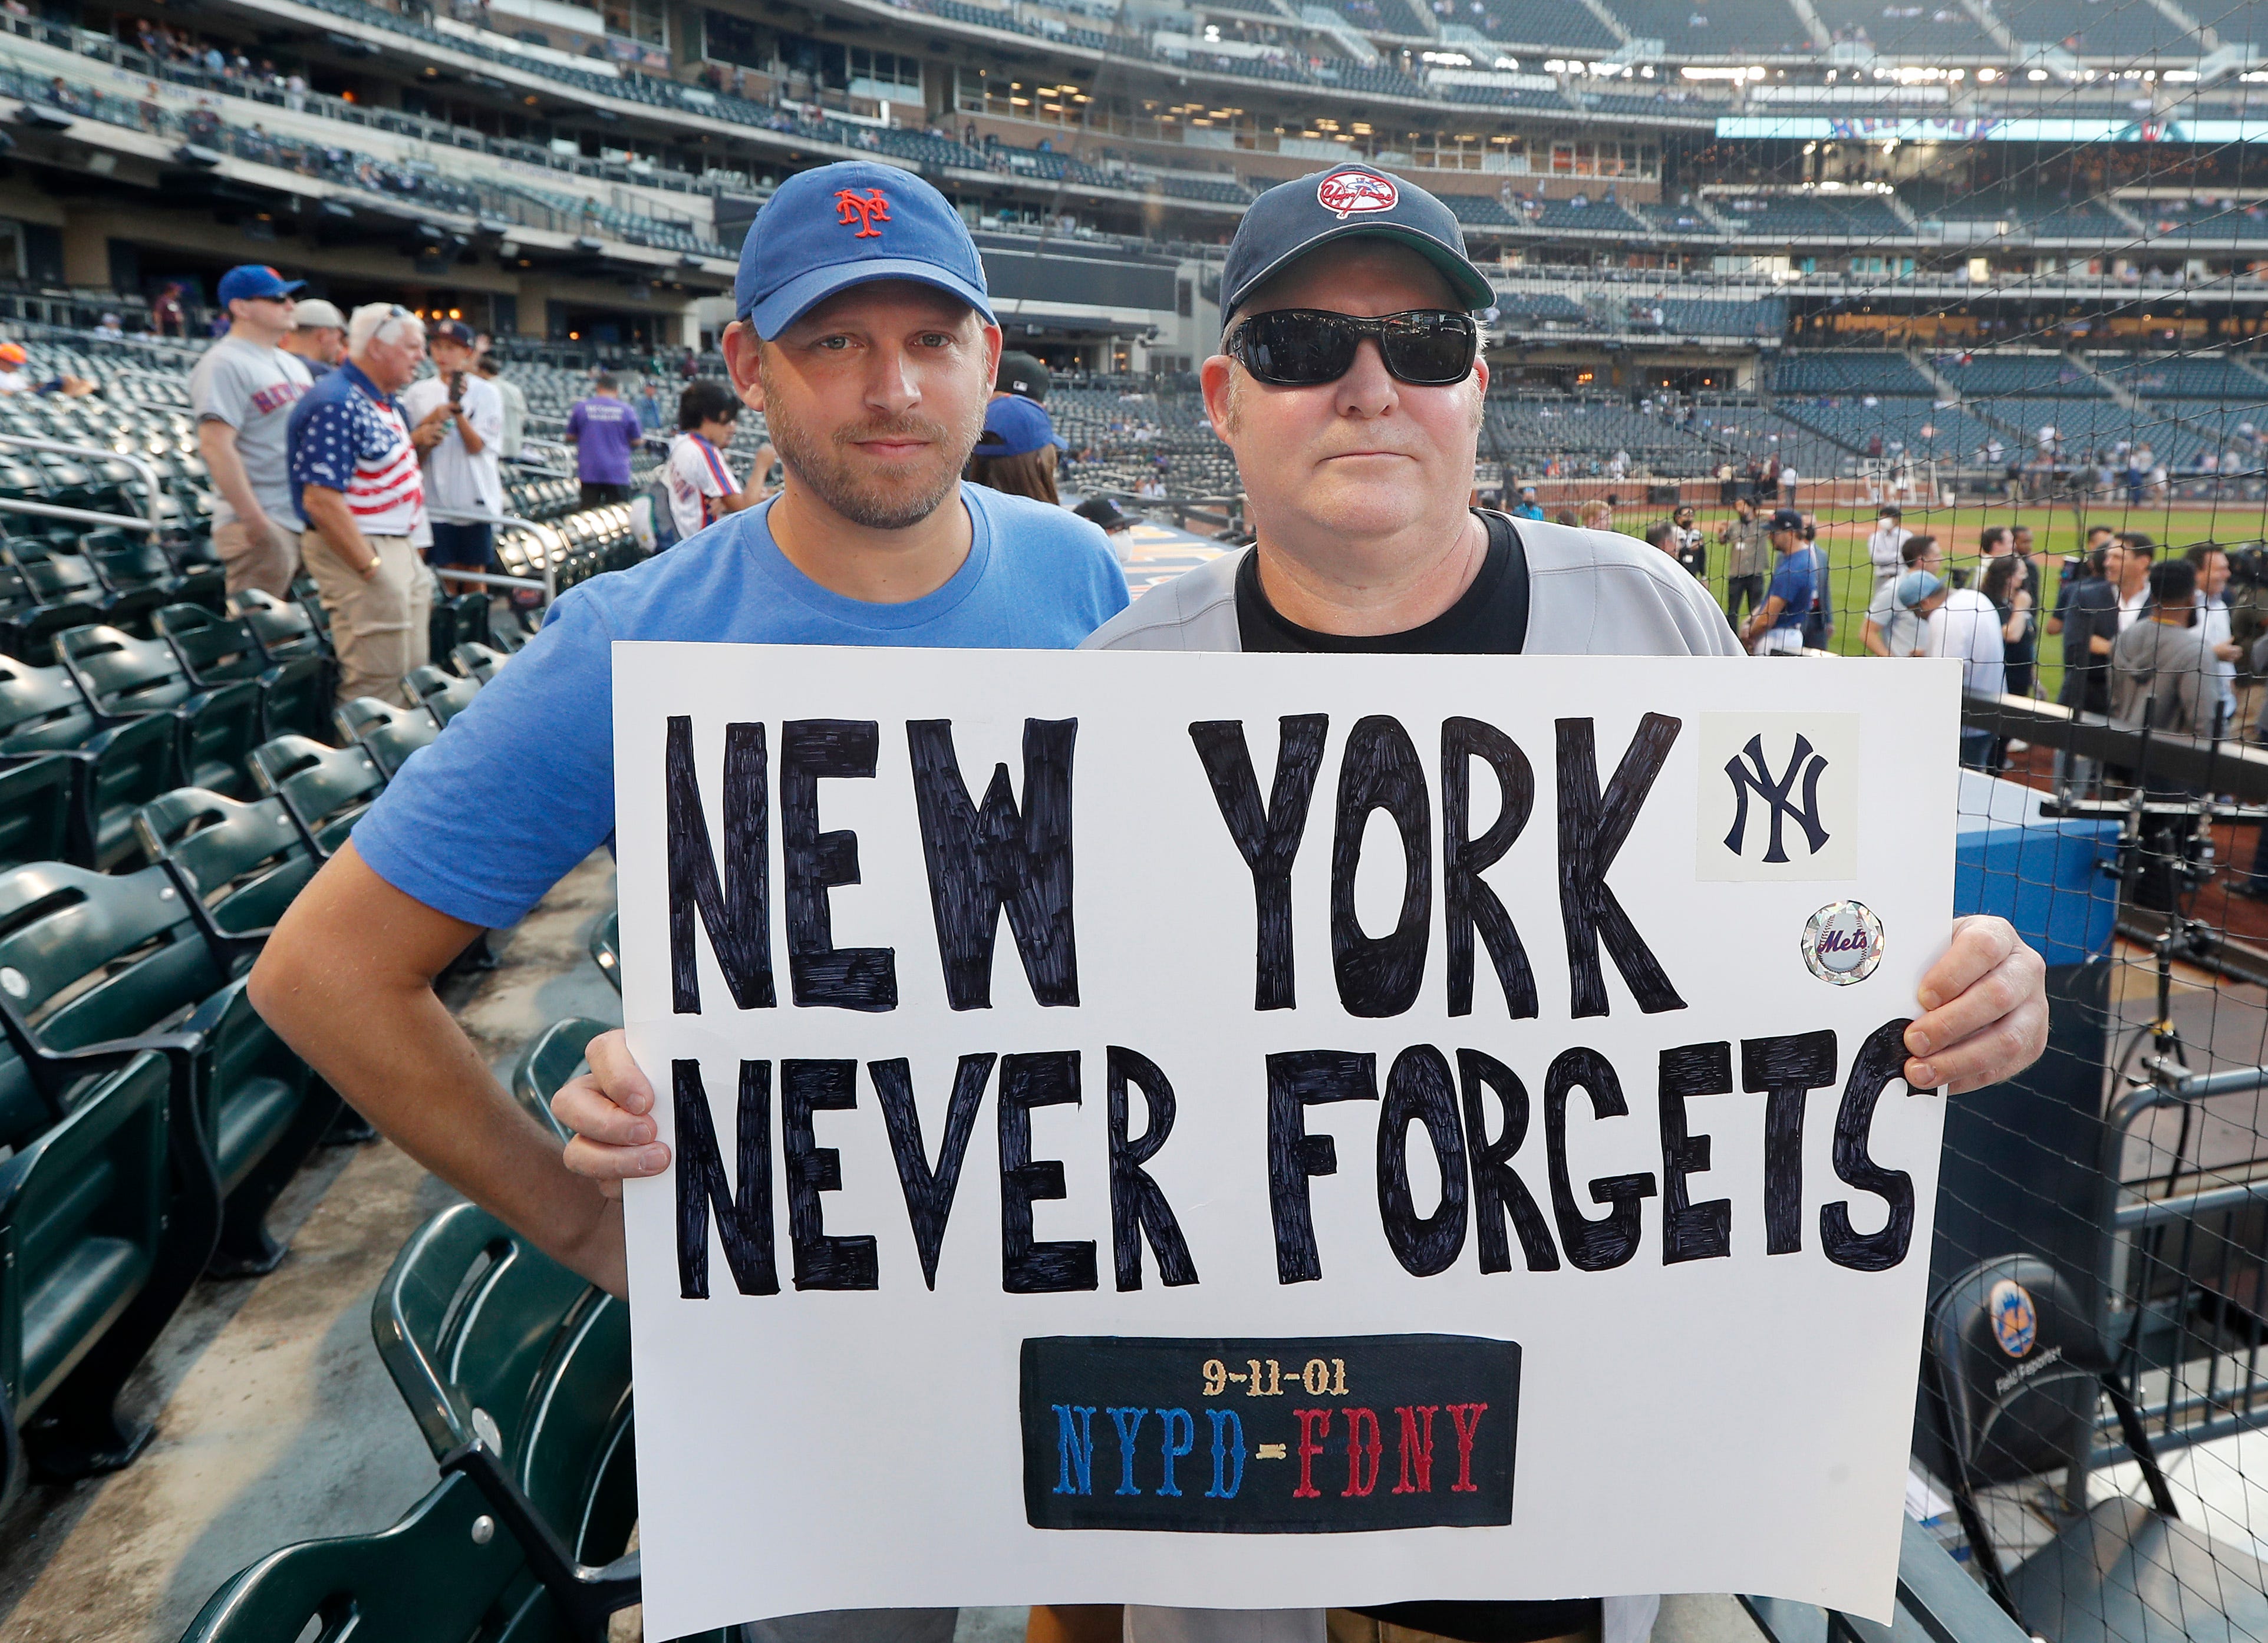 Mets, New York fans commemorate 20th anniversary of 9/11